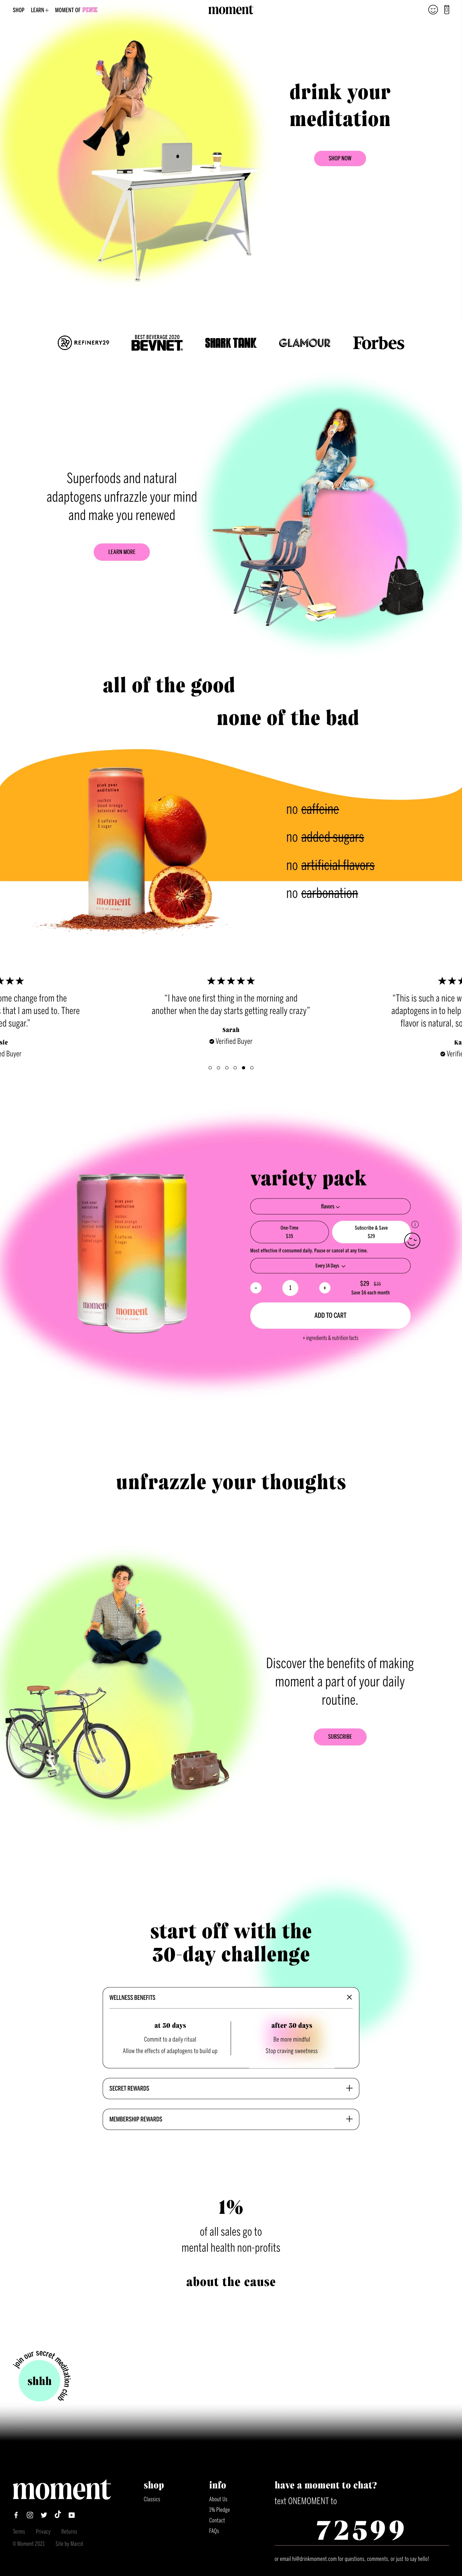 Moment Landing Page Example: Take a Moment. The natural botanical beverage which lets you drink your meditation. No caffeine. No added sugar. No fake stuff. Not carbonated. Keto